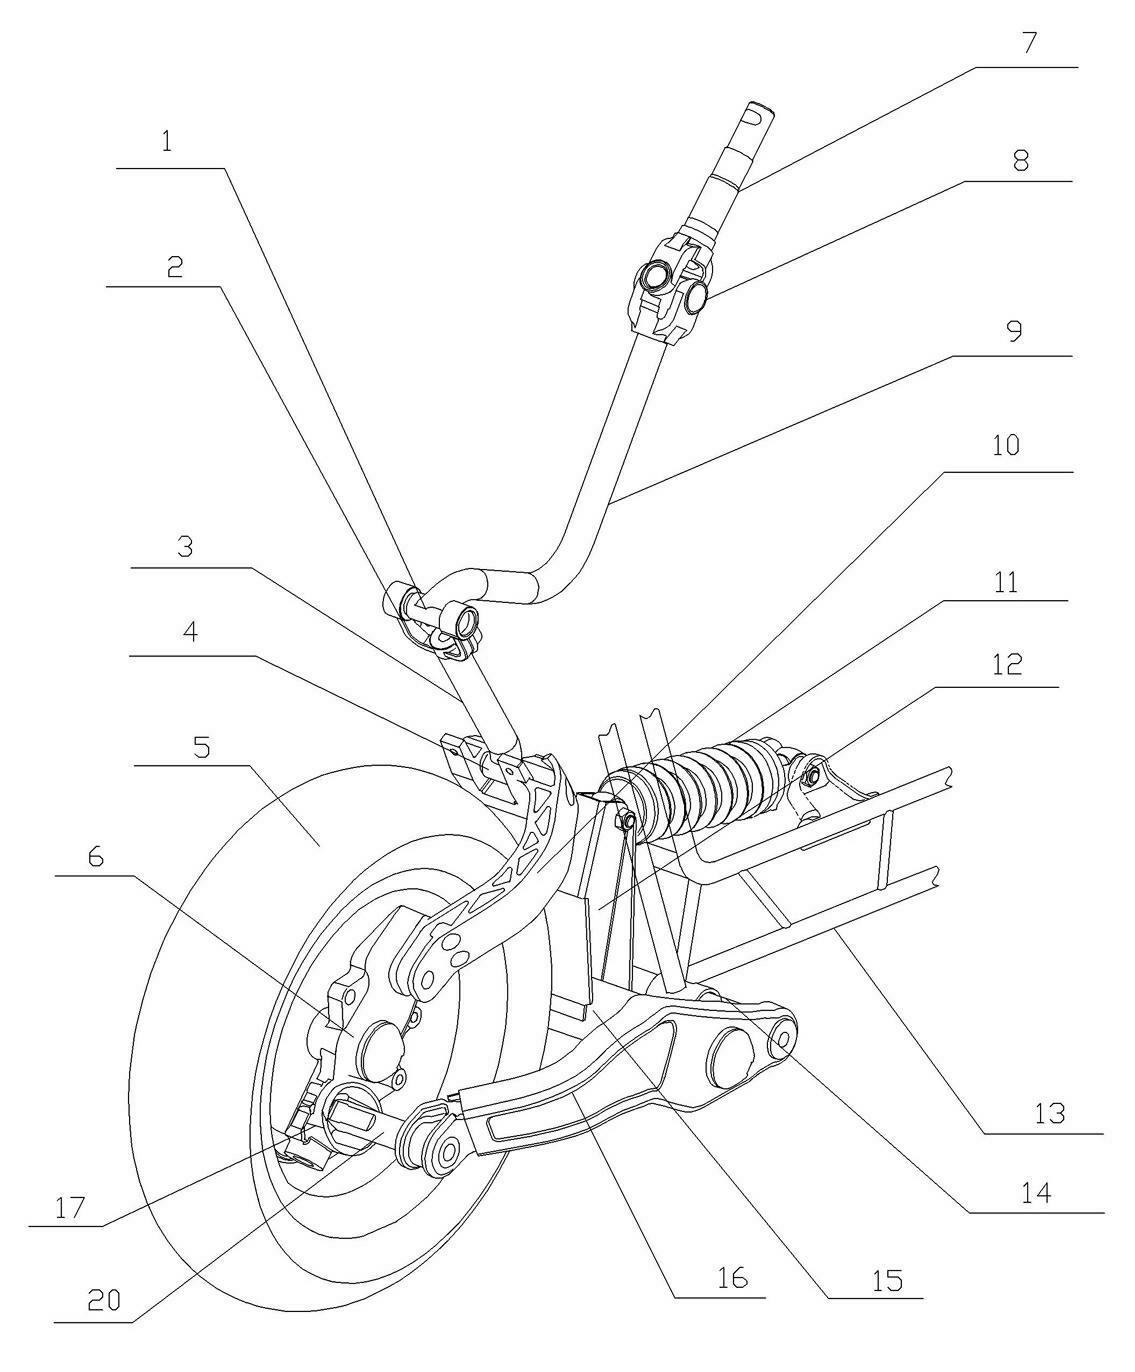 Front suspension system for motorcycle